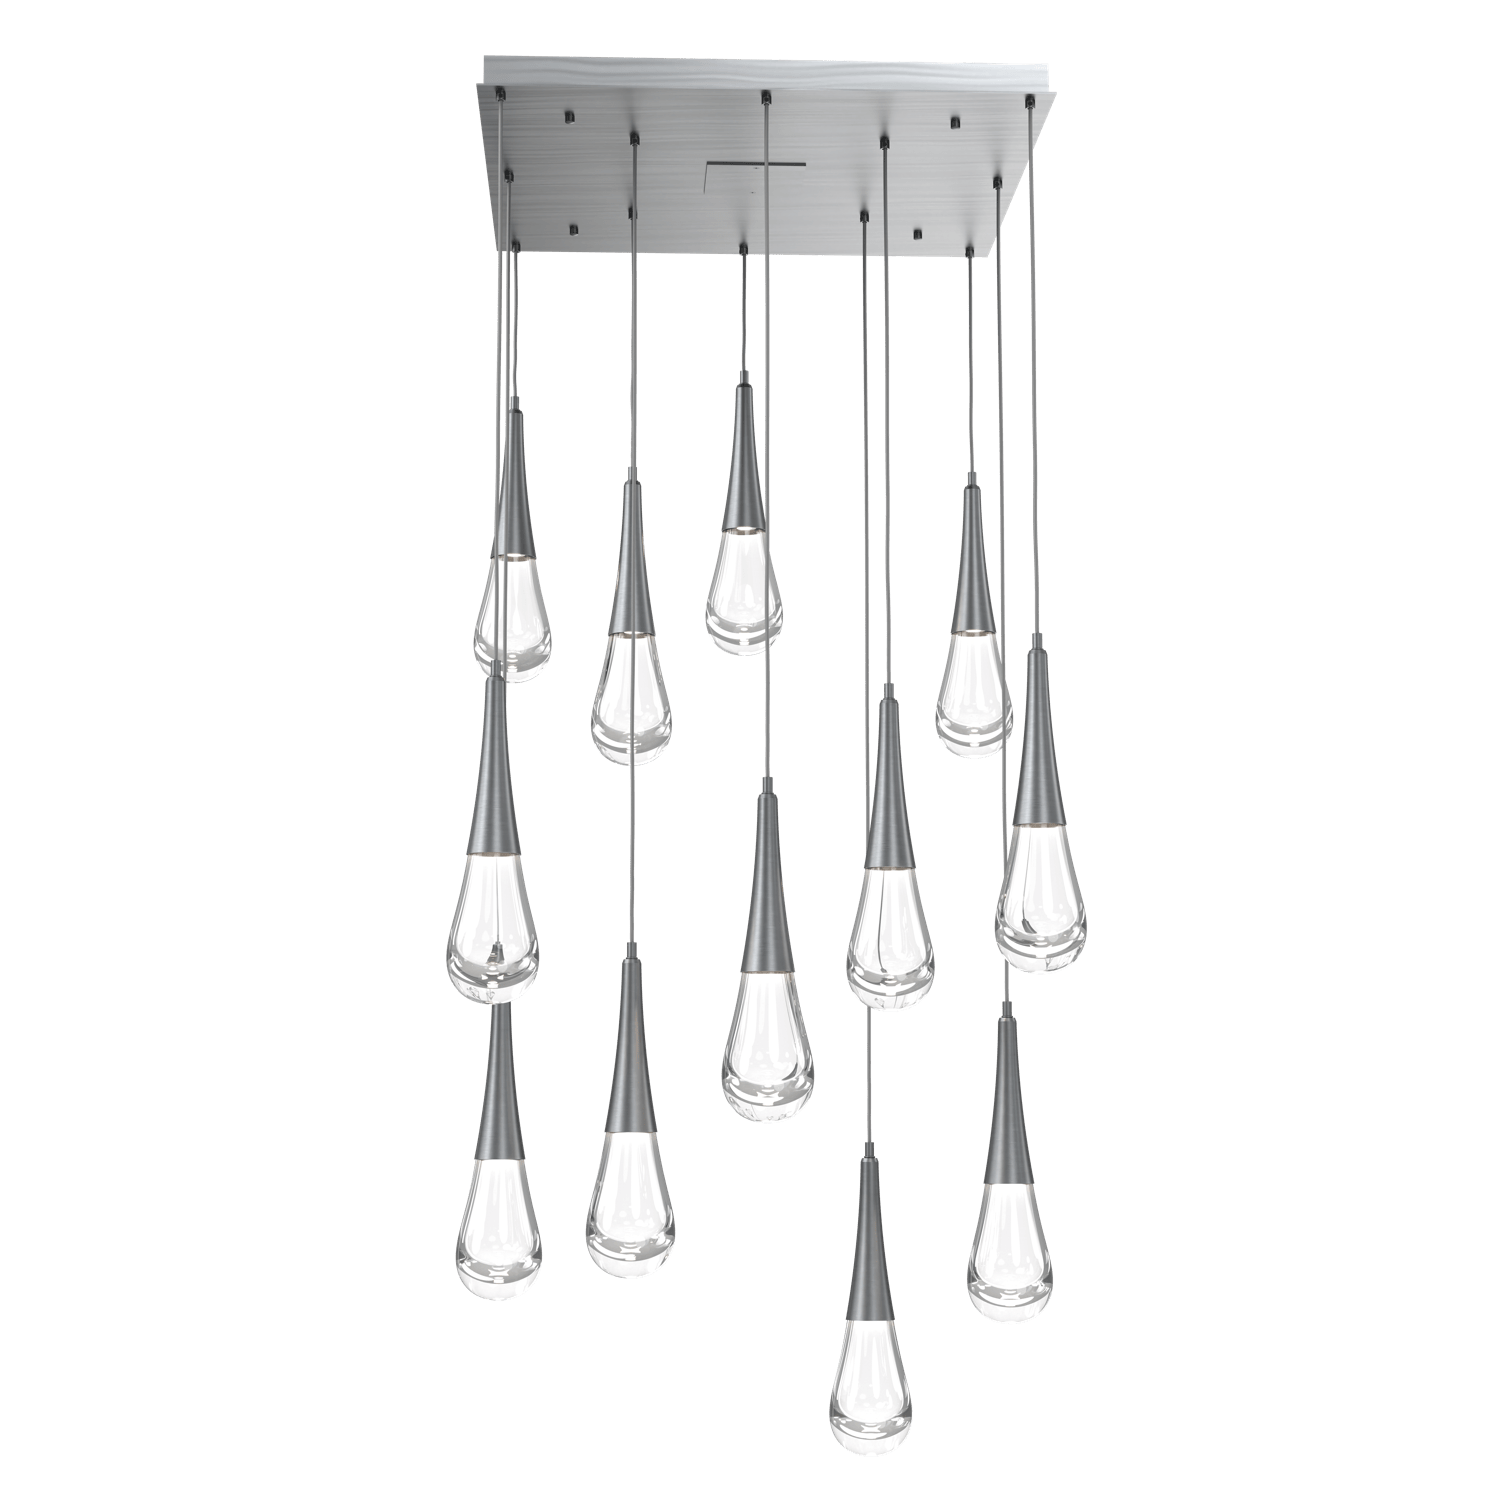 CHB0078-12-GM-Hammerton-Studio-Raindrop-12-light-square-pendant-chandelier-with-gunmetal-finish-and-clear-blown-glass-shades-and-LED-lamping